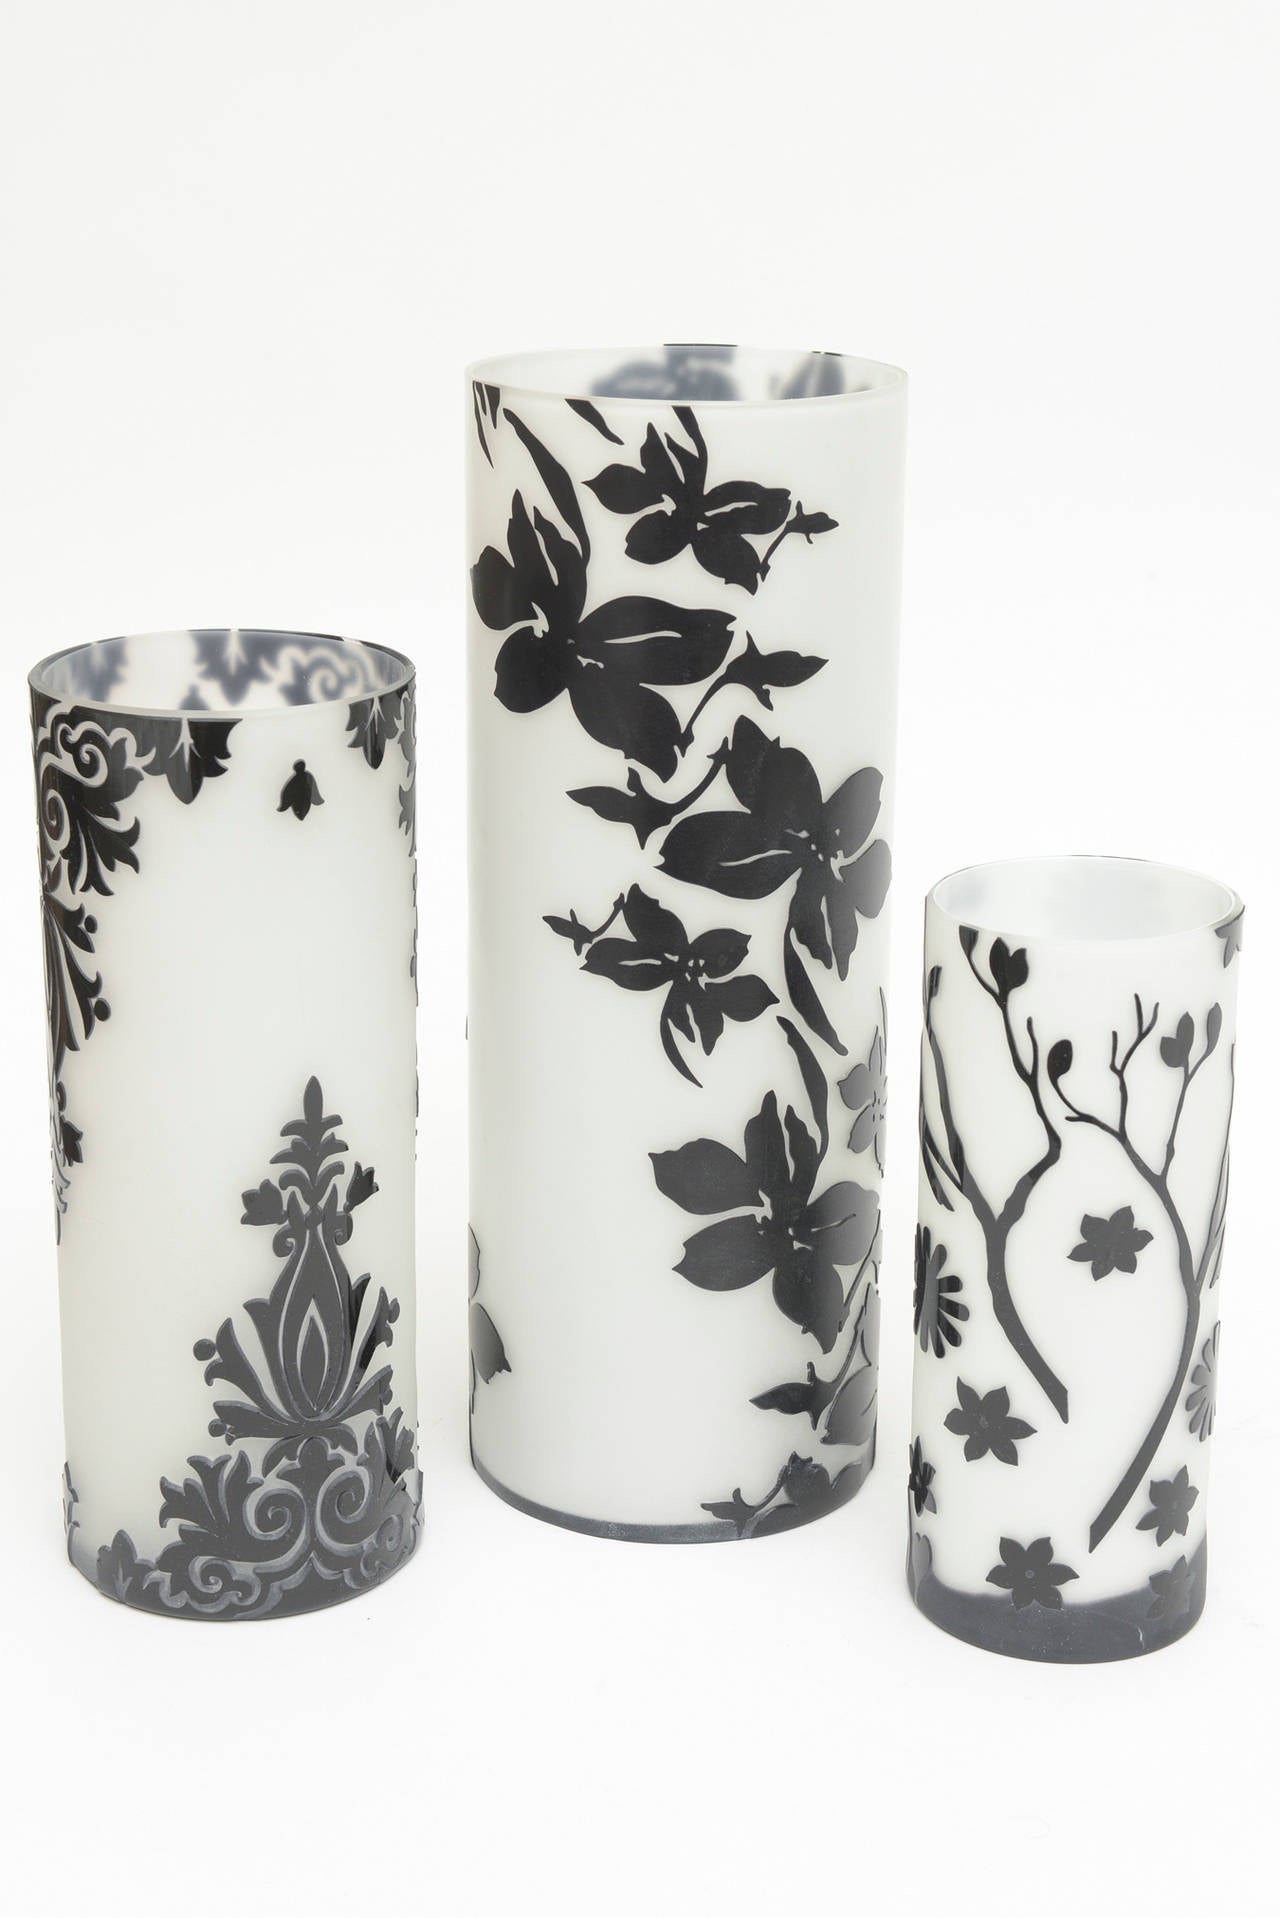 The dimensional different patterns raised relief of the black against the opaque white glass make this trio of cameo glass vases so dramatic. The patterns range from flowers to birds and flowers to fleur-de-lis. It is cut glass in cameo form.
They